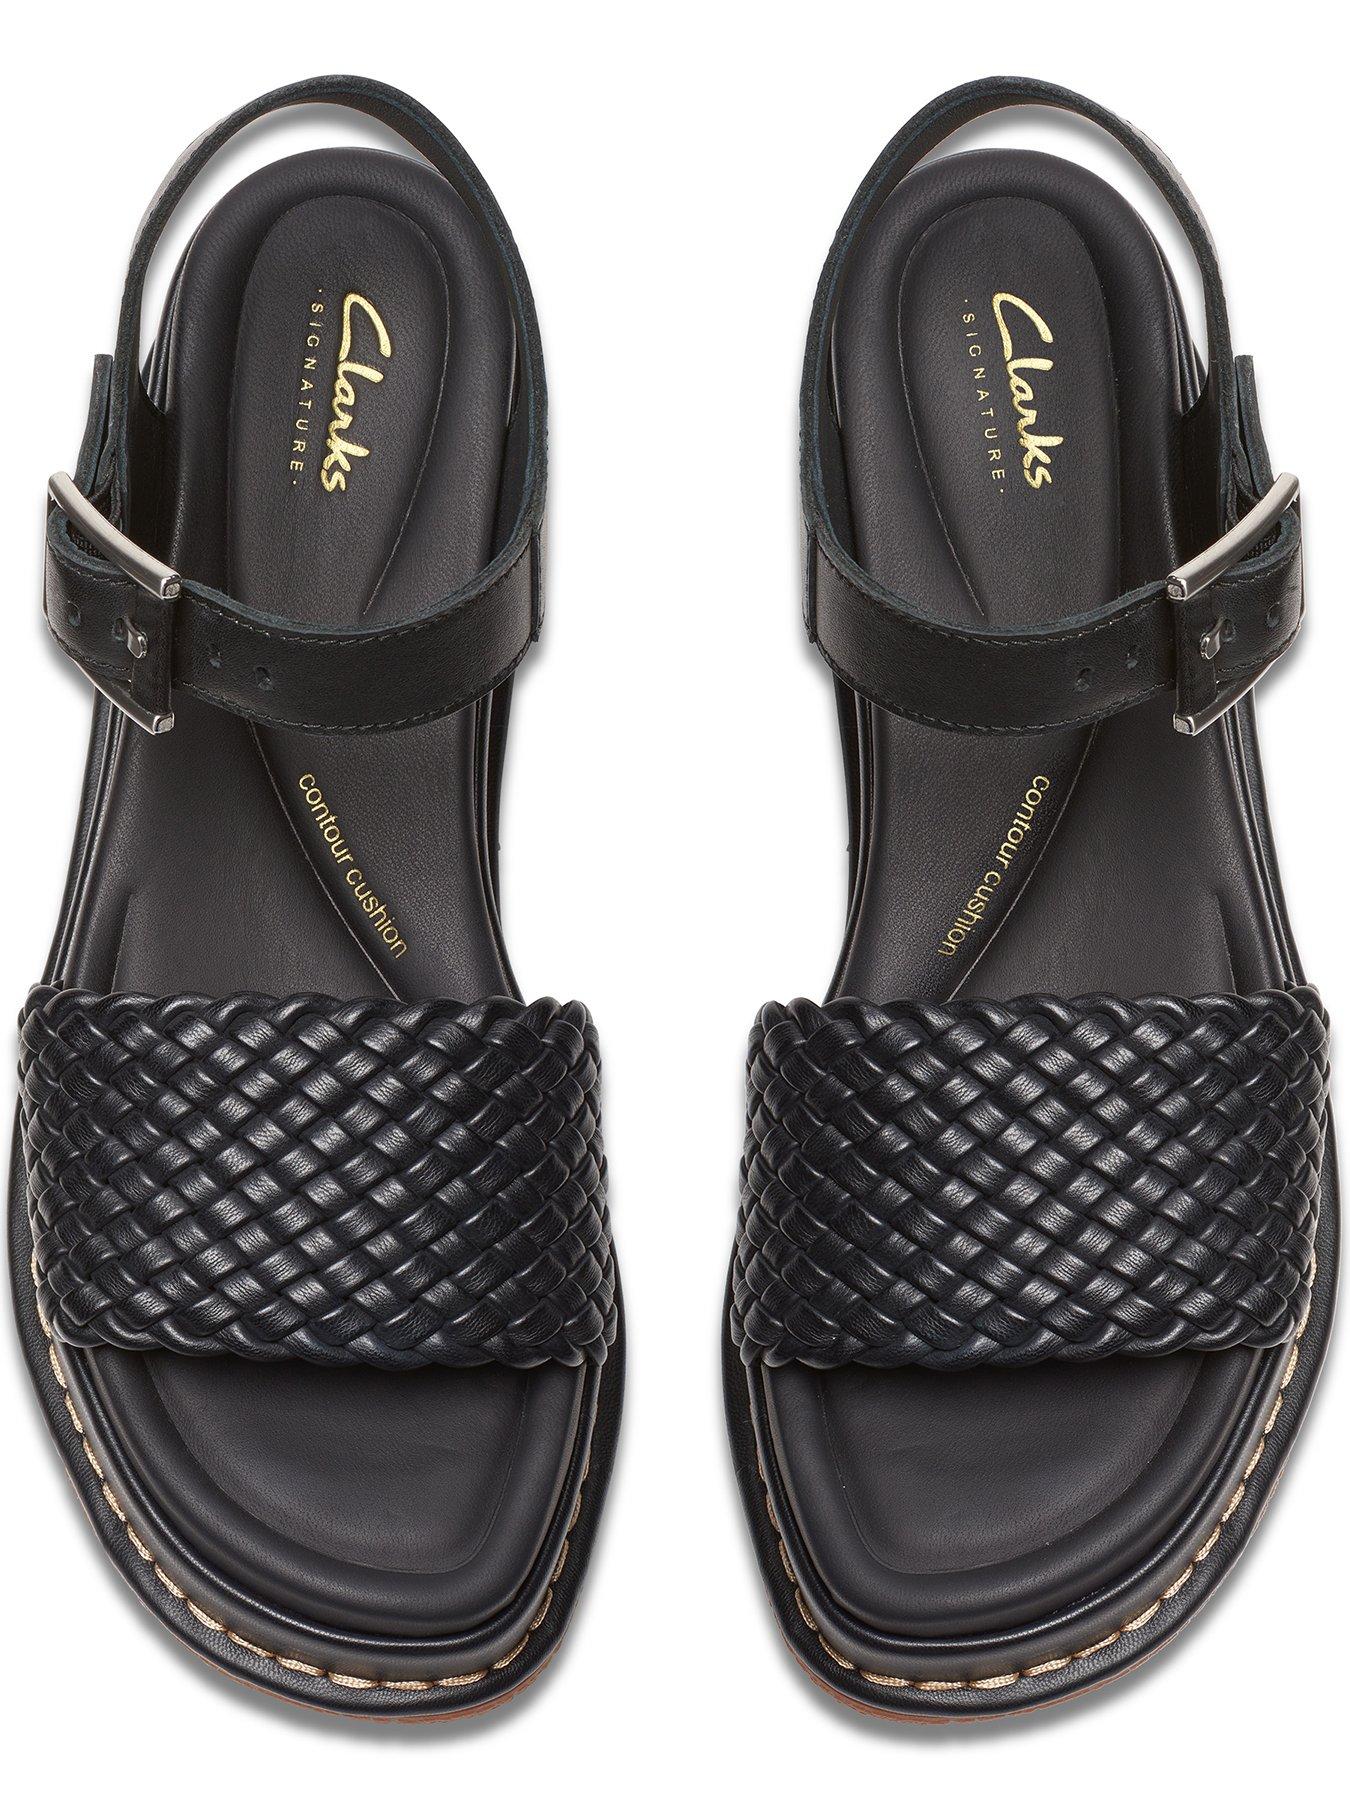 Clarks Kimmei Bay Wedge Buckle Strap Sandals - Black | Very.co.uk